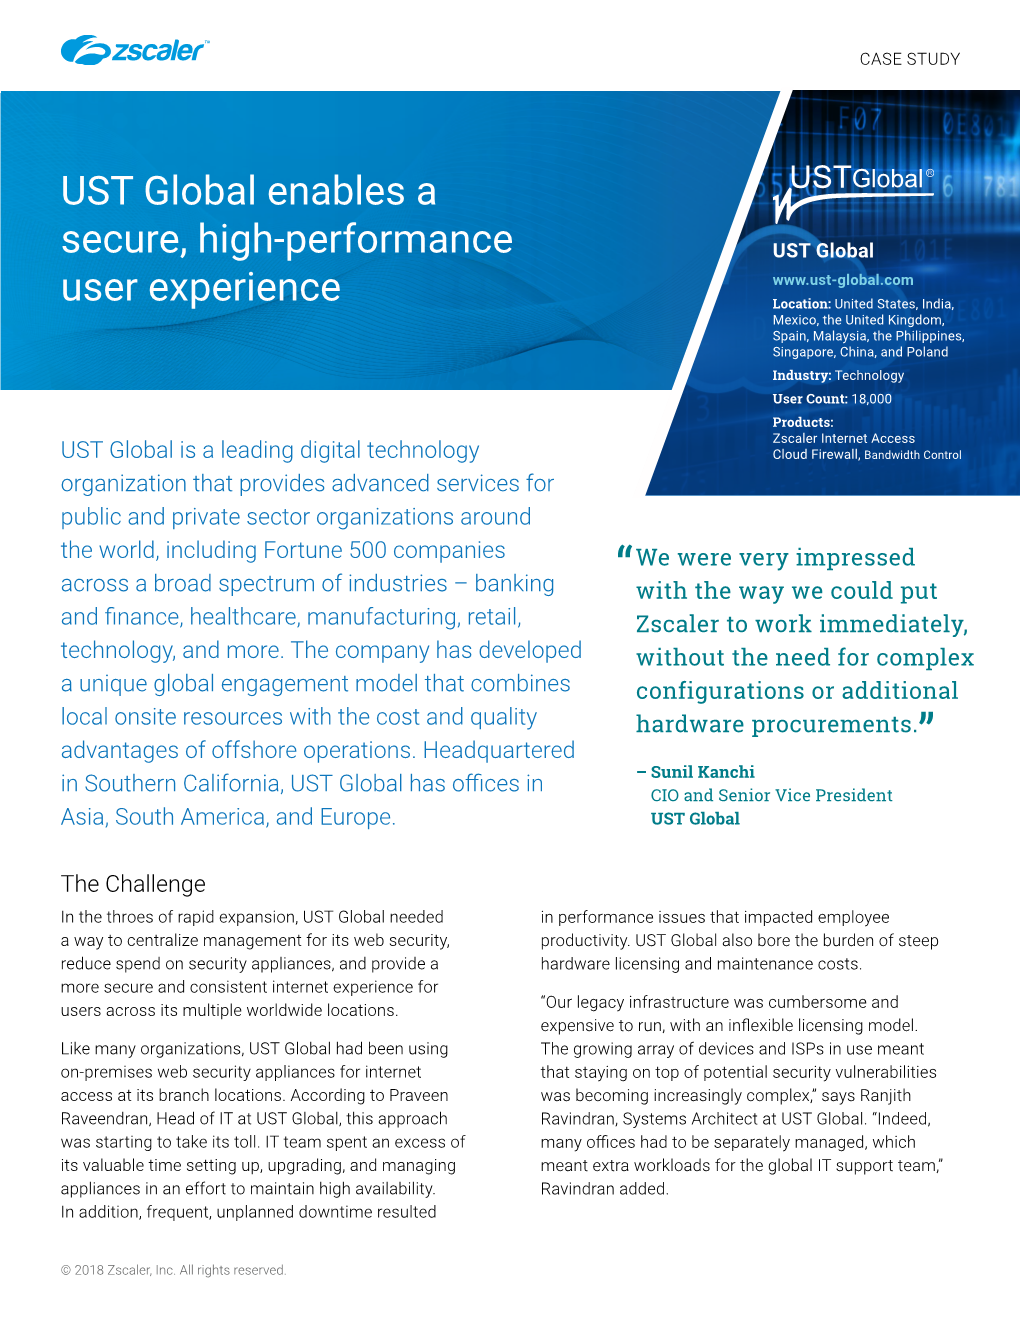 UST Global and Zscaler | Customer Case Study